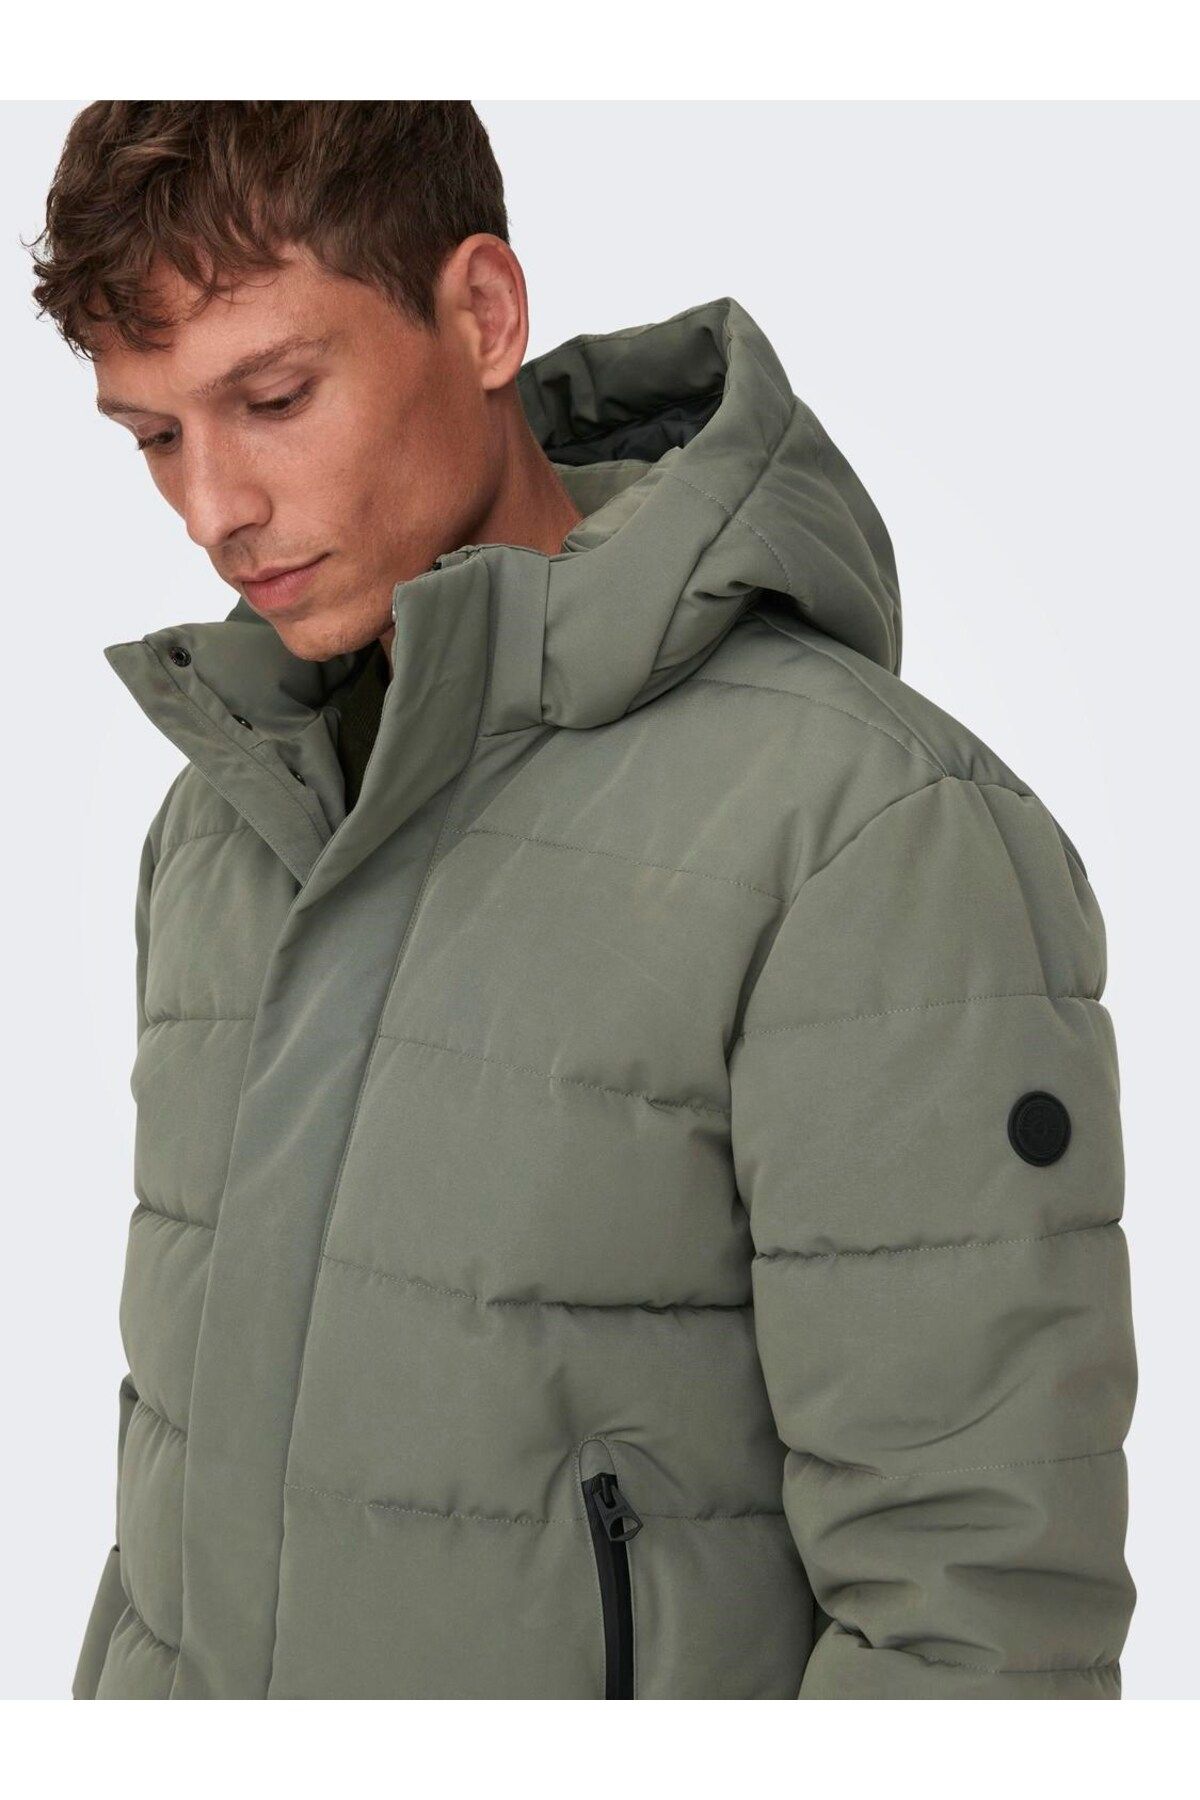 ONLY&SONS PARKA UOMO SOLID 22019935 - Grandinetti Sport